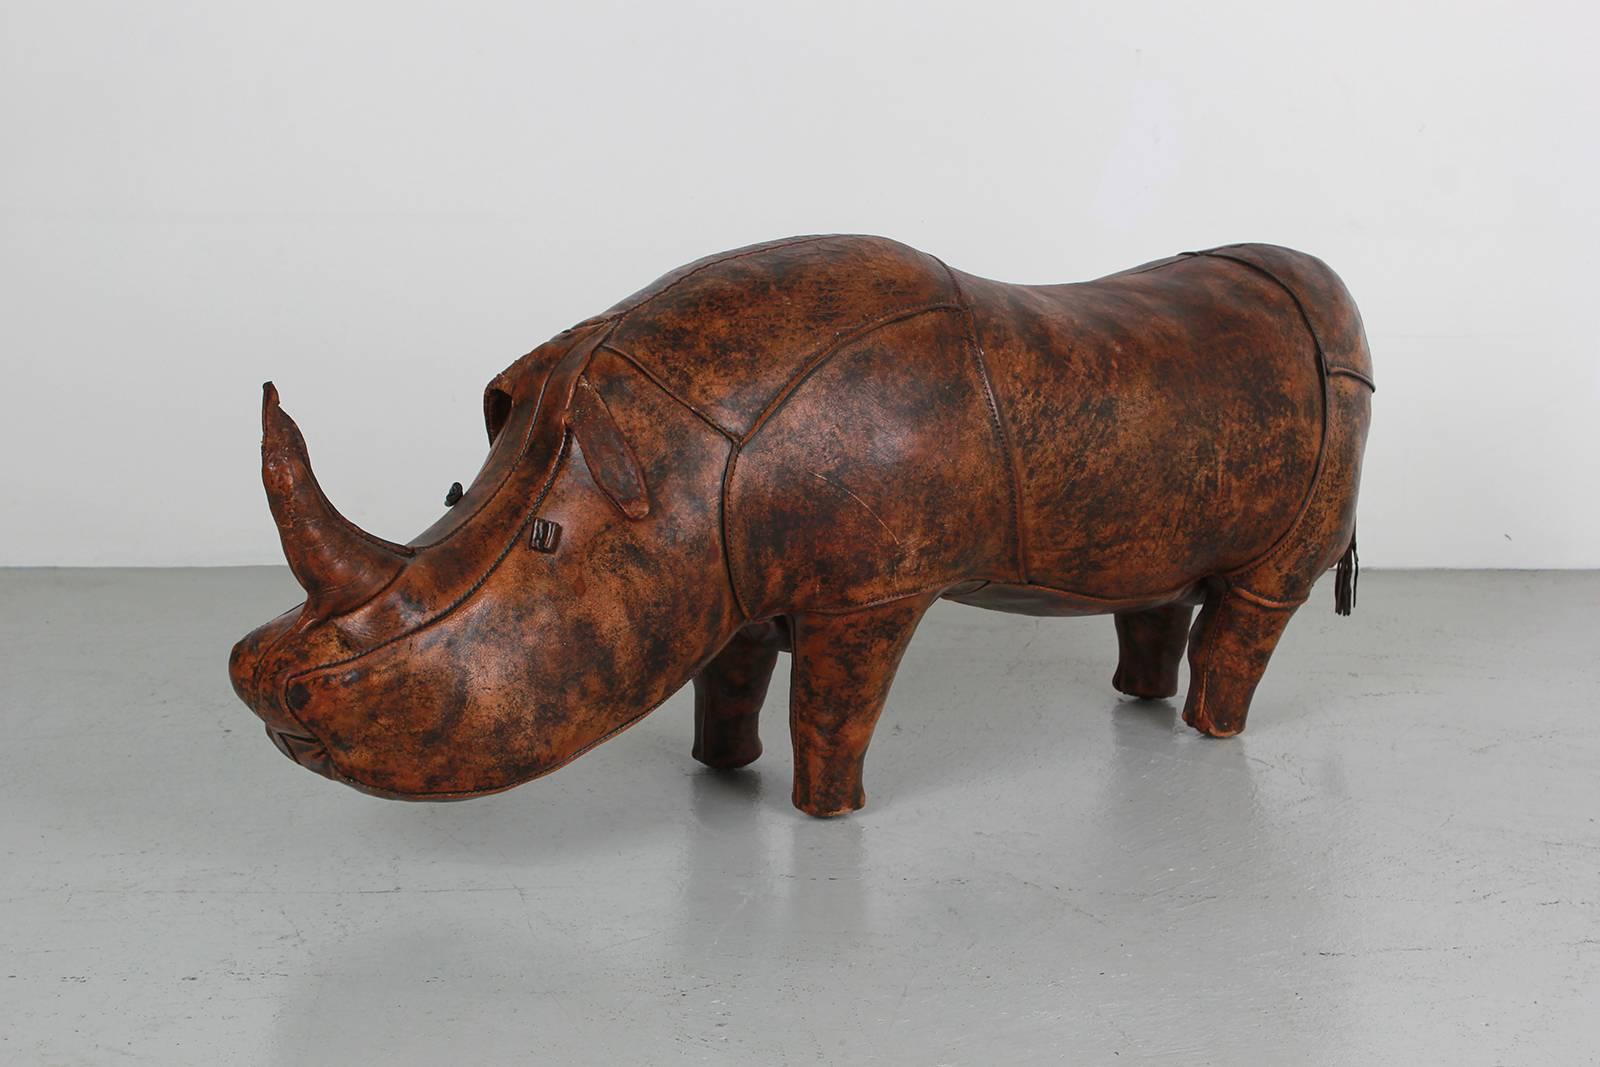 Gigantic leather rhinoceros by Dimitri Omersa. Originally designed as a “LIBERTY” exclusive, with beautiful patina to leather. This is the second largest that Omersa made. Marked with the A&F logo on the ear.